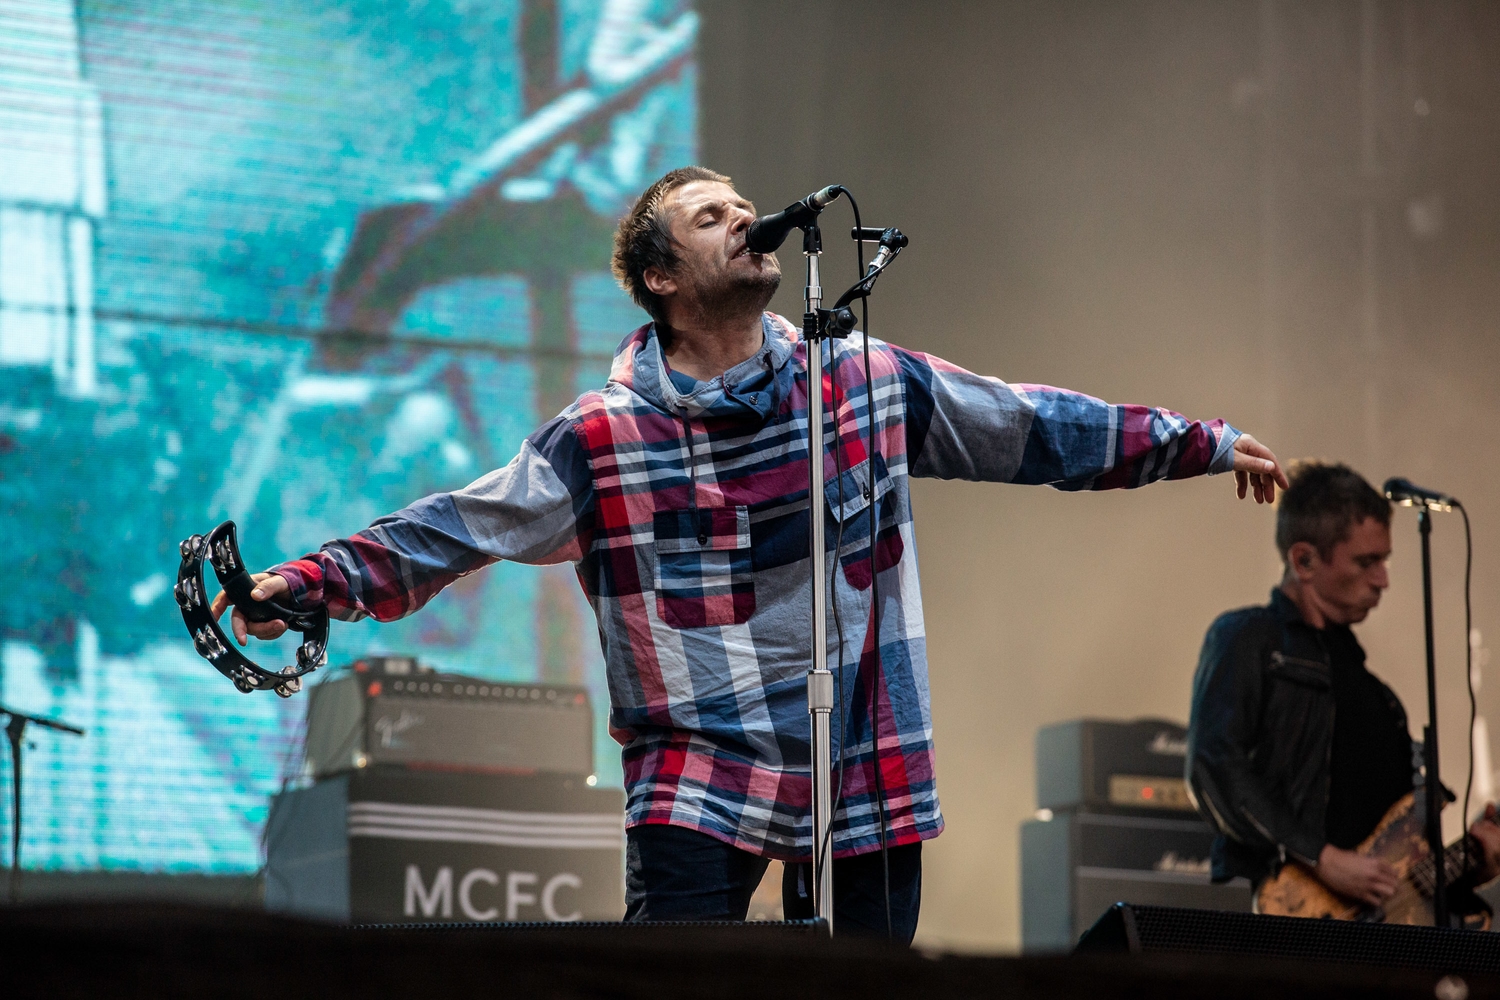 Liam Gallagher brings the big hits for the last day of Pohoda Festival 2019